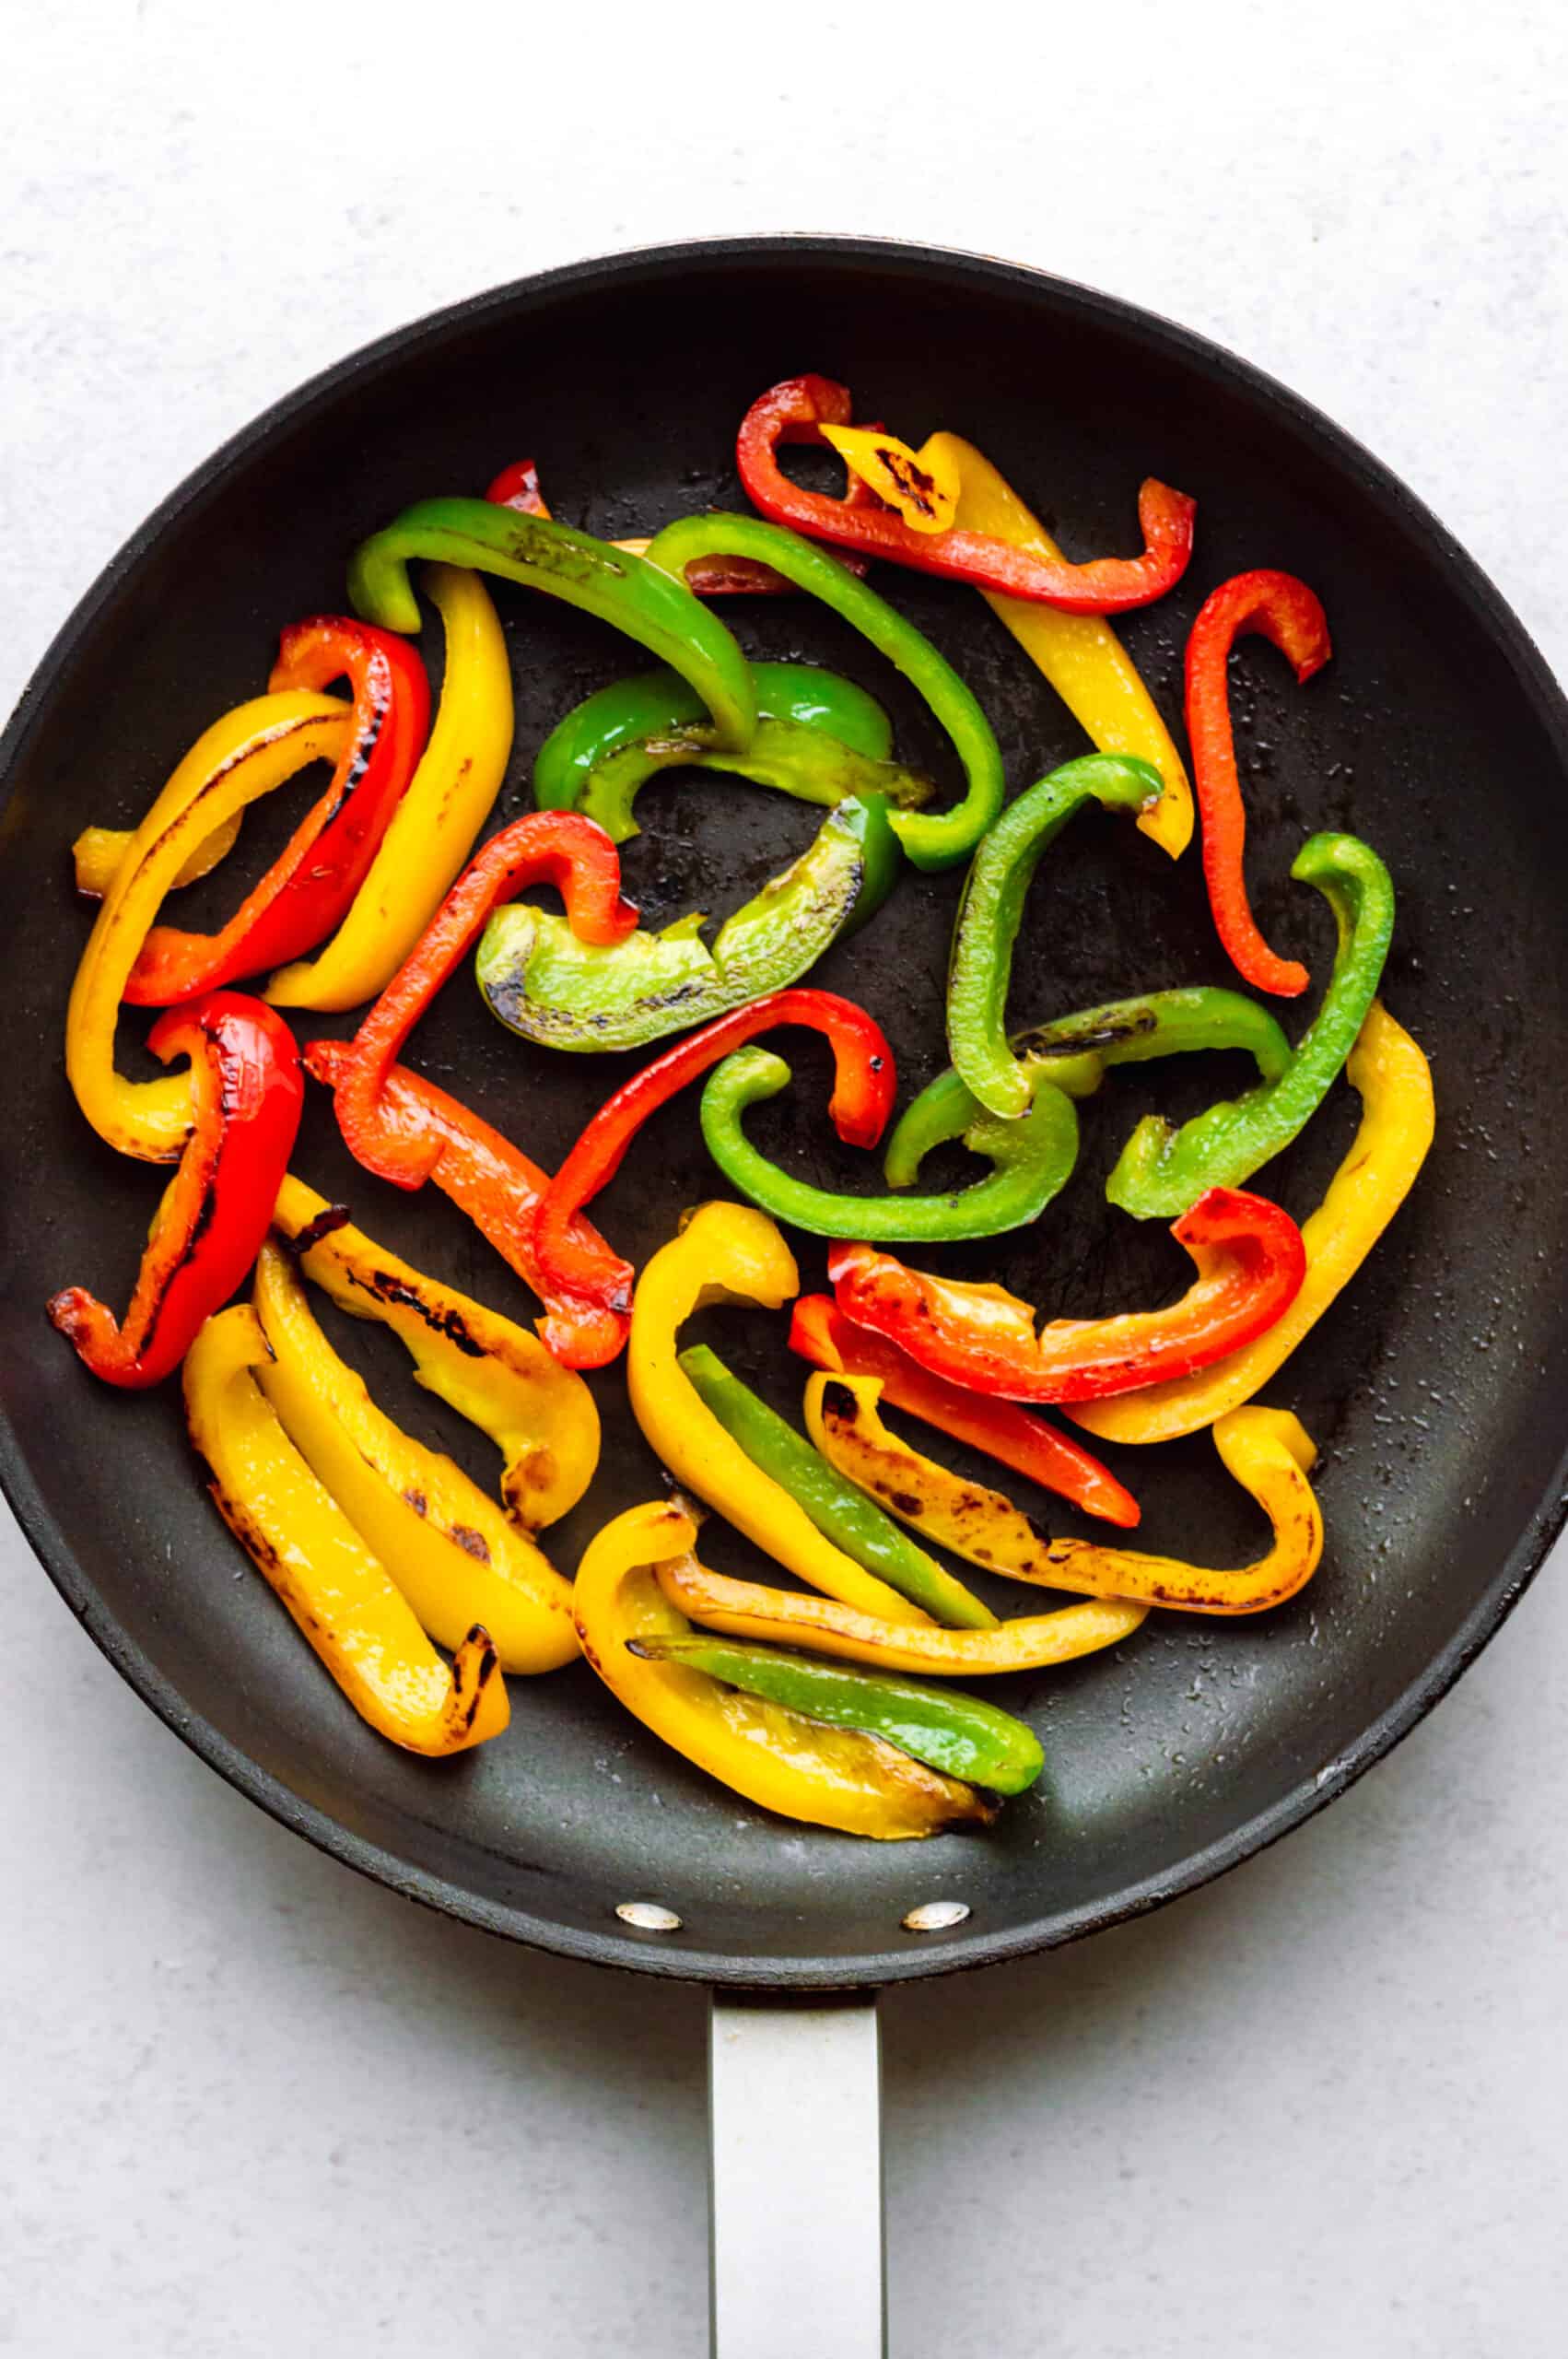 Sauteeing strips of green, red, and yellow bell peppers in a skillet.